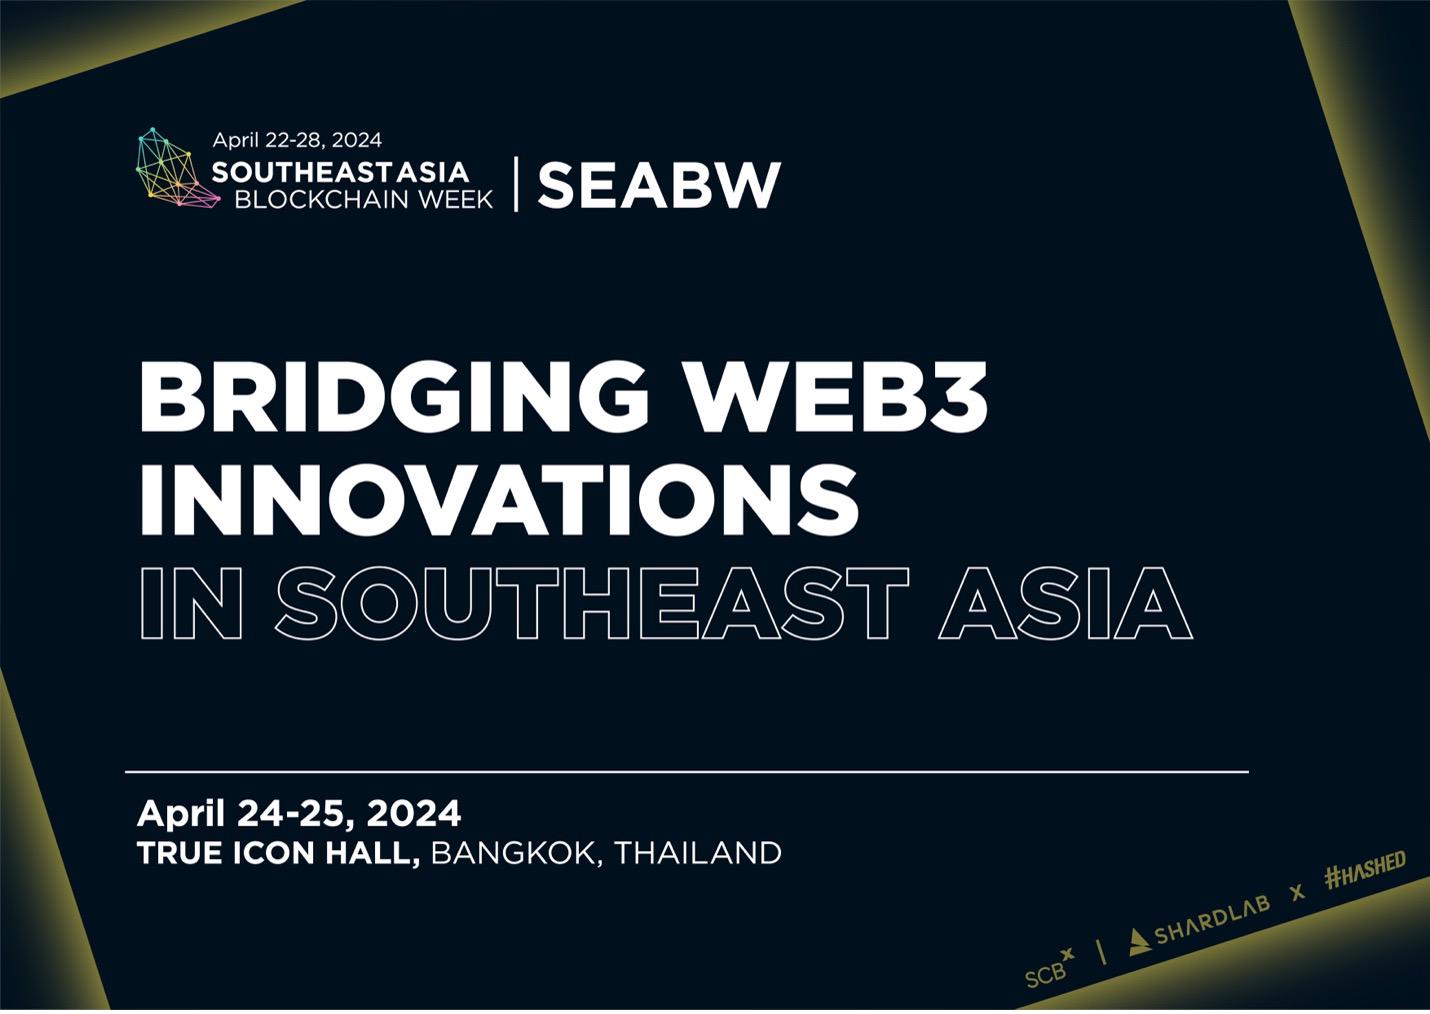 Southeast Asia Blockchain Week Announces Inaugural Conference in Bangkok From April 22